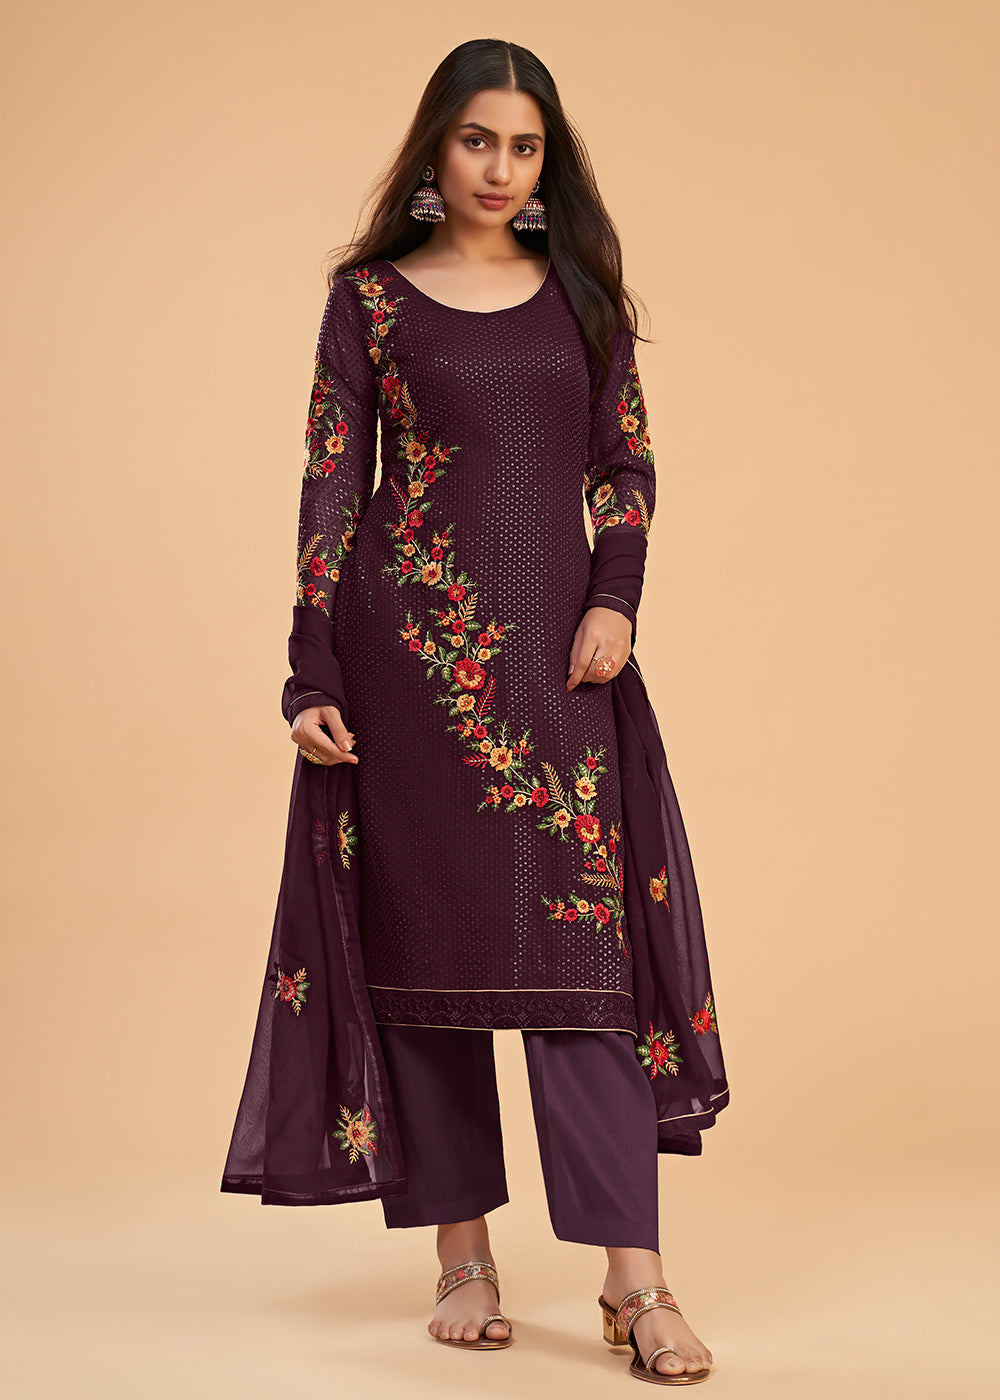 Buy Now Floral Embroidered Wine Indian Wedding Wear Salwar Suit Online in USA, UK, Canada, Germany, Australia & Worldwide at Empress Clothing.